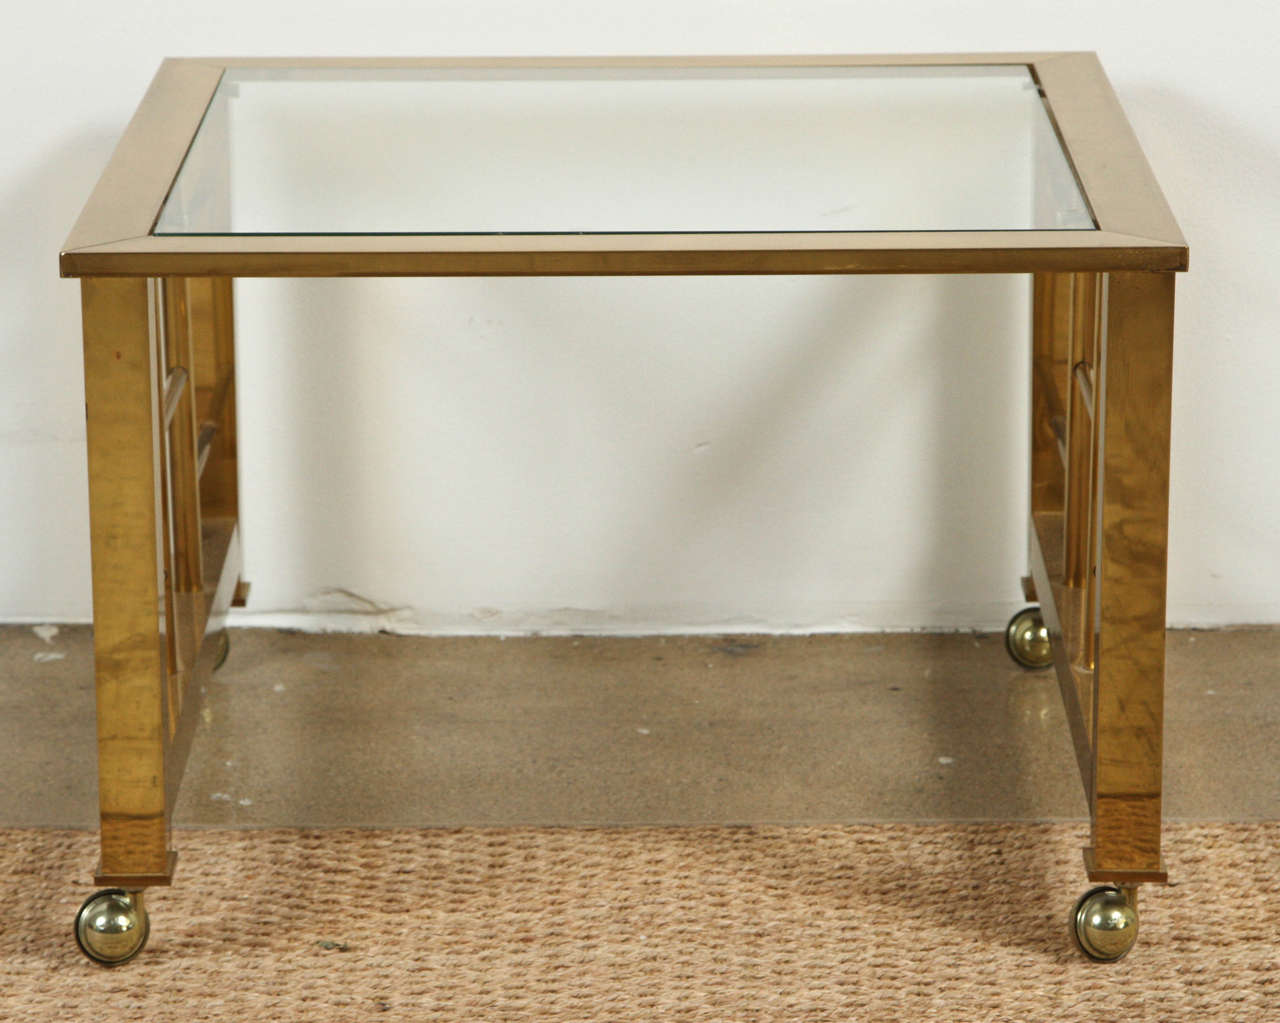 Perfect for the hard to find side table next to a chair and easy to move as it is on rollers. Brass and glass with brass cut-out on the sides shaped like squares.